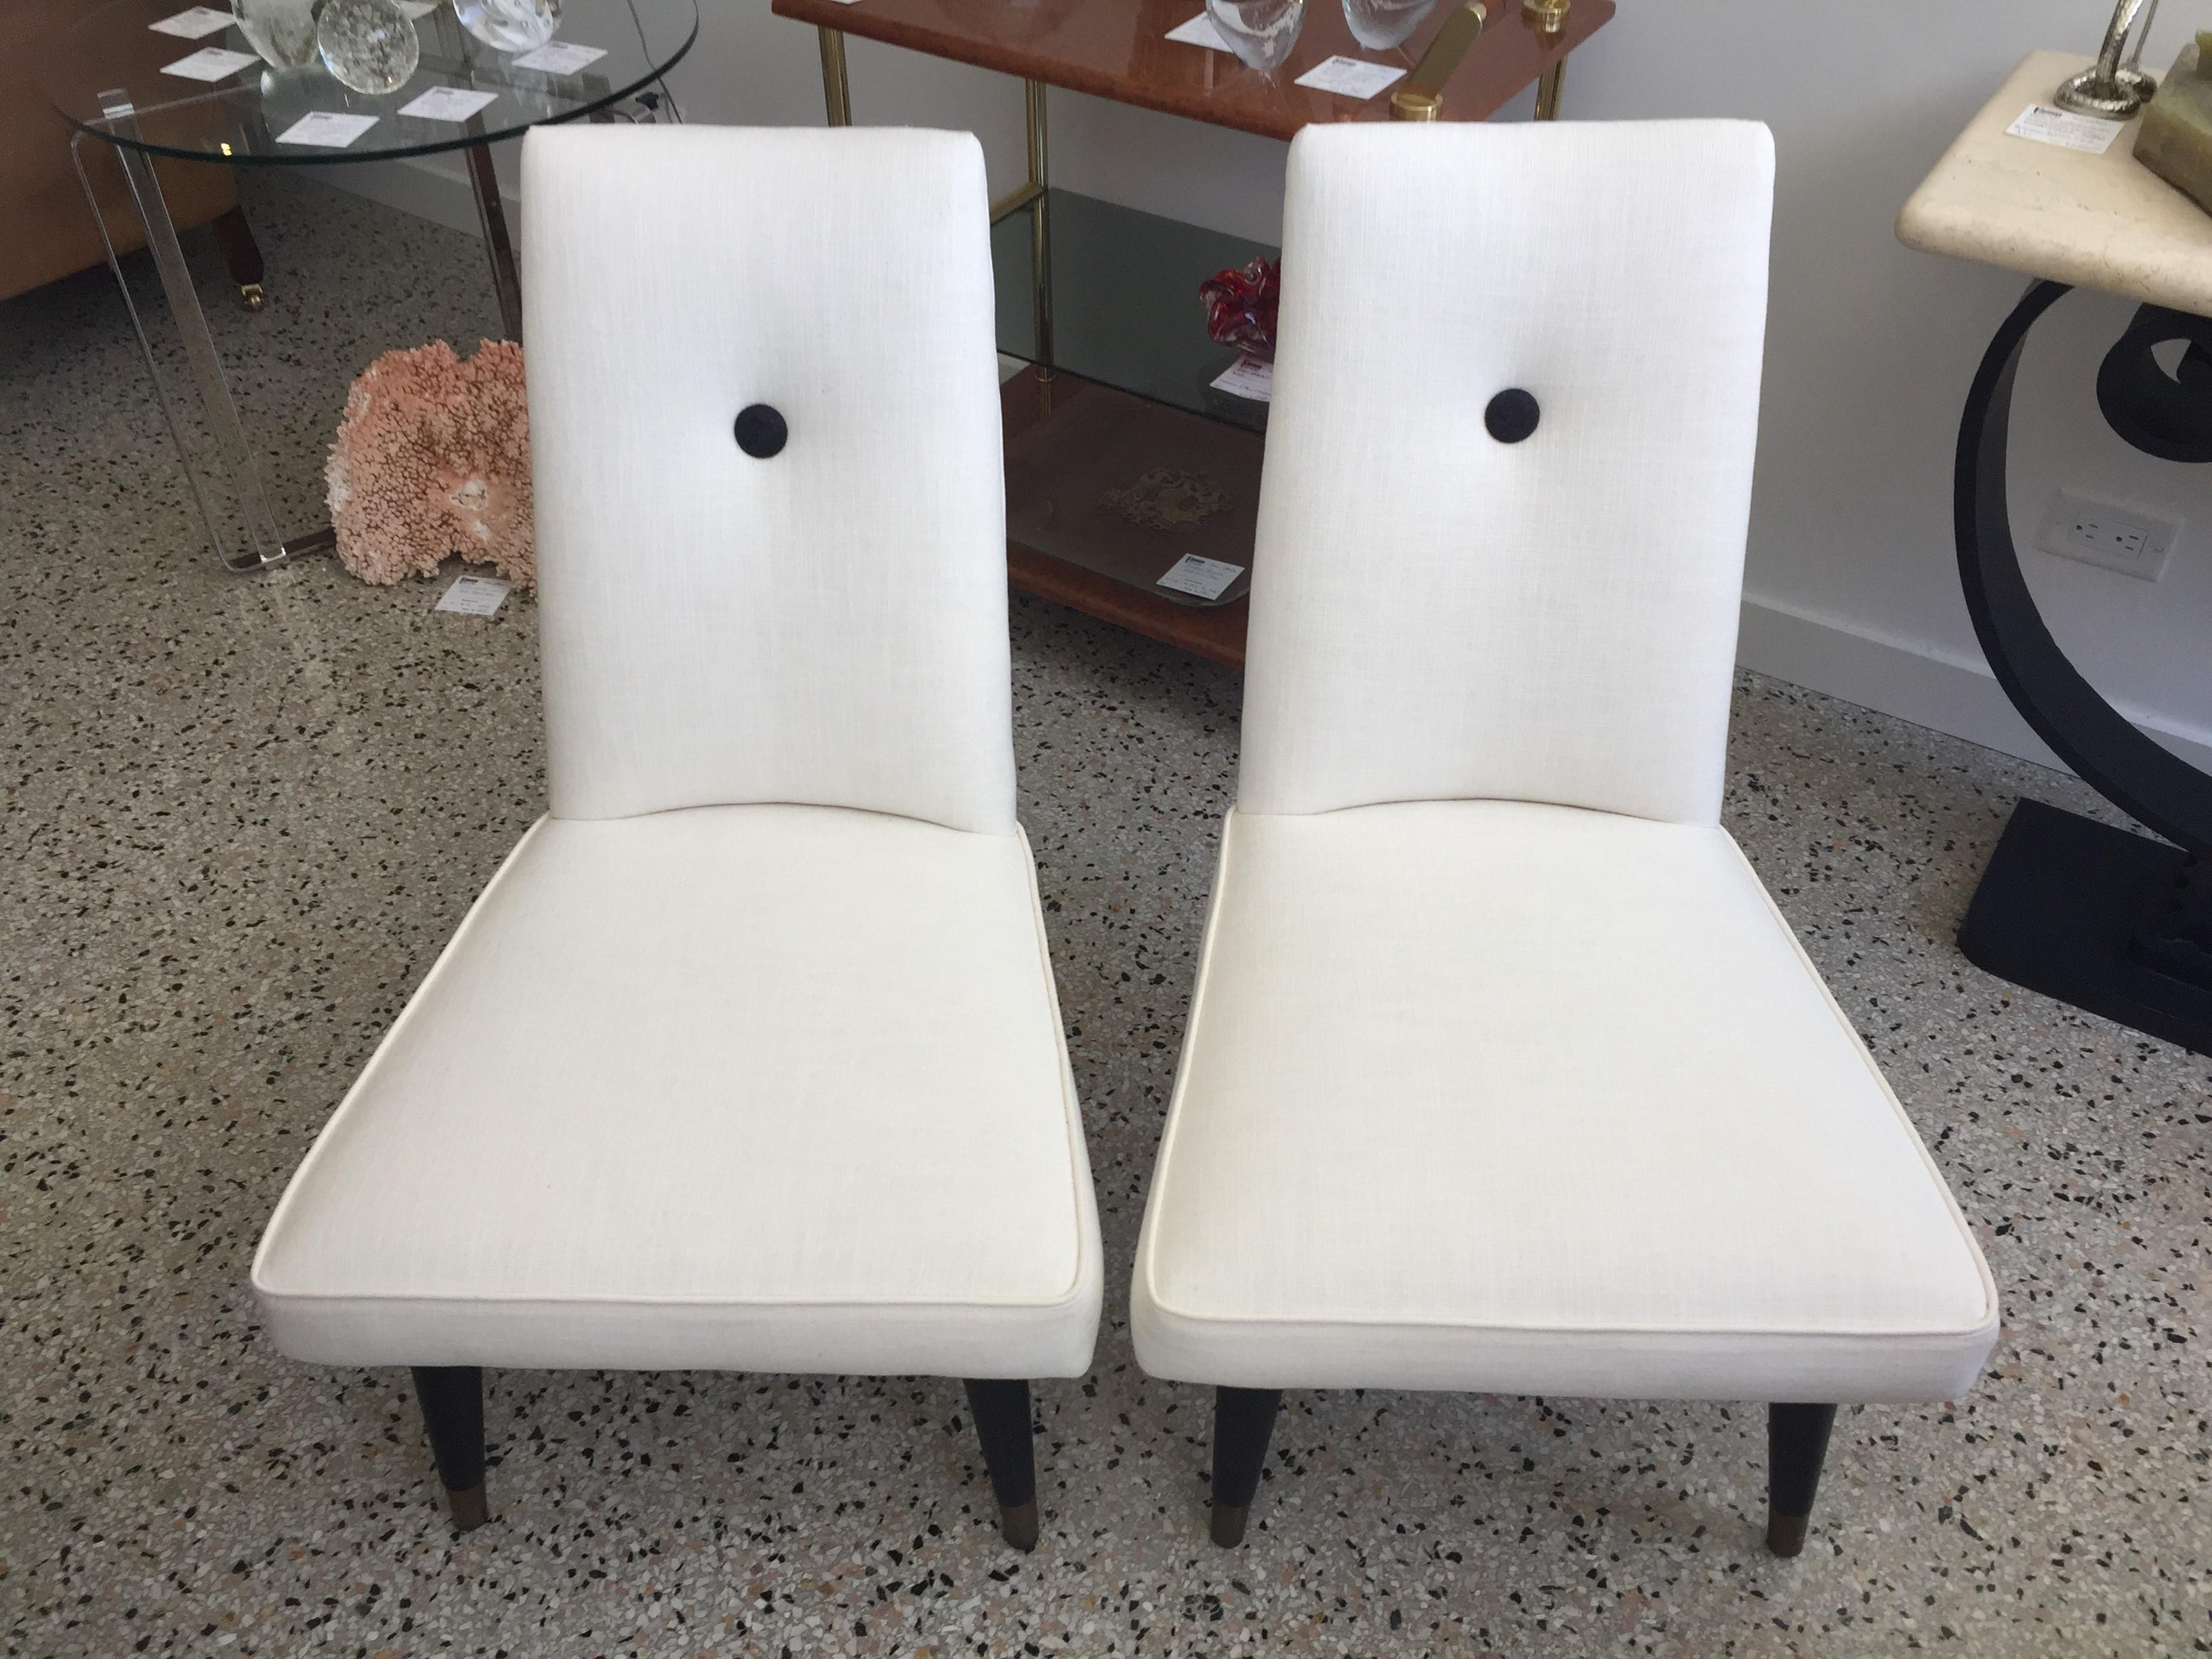 This pair of Mid-Century slipper chairs were purchased in Italy and have been professionally restored. The upholstery fabric is a woven texture in a soft white and black.

For best net trade price or additional questions regarding this item, please